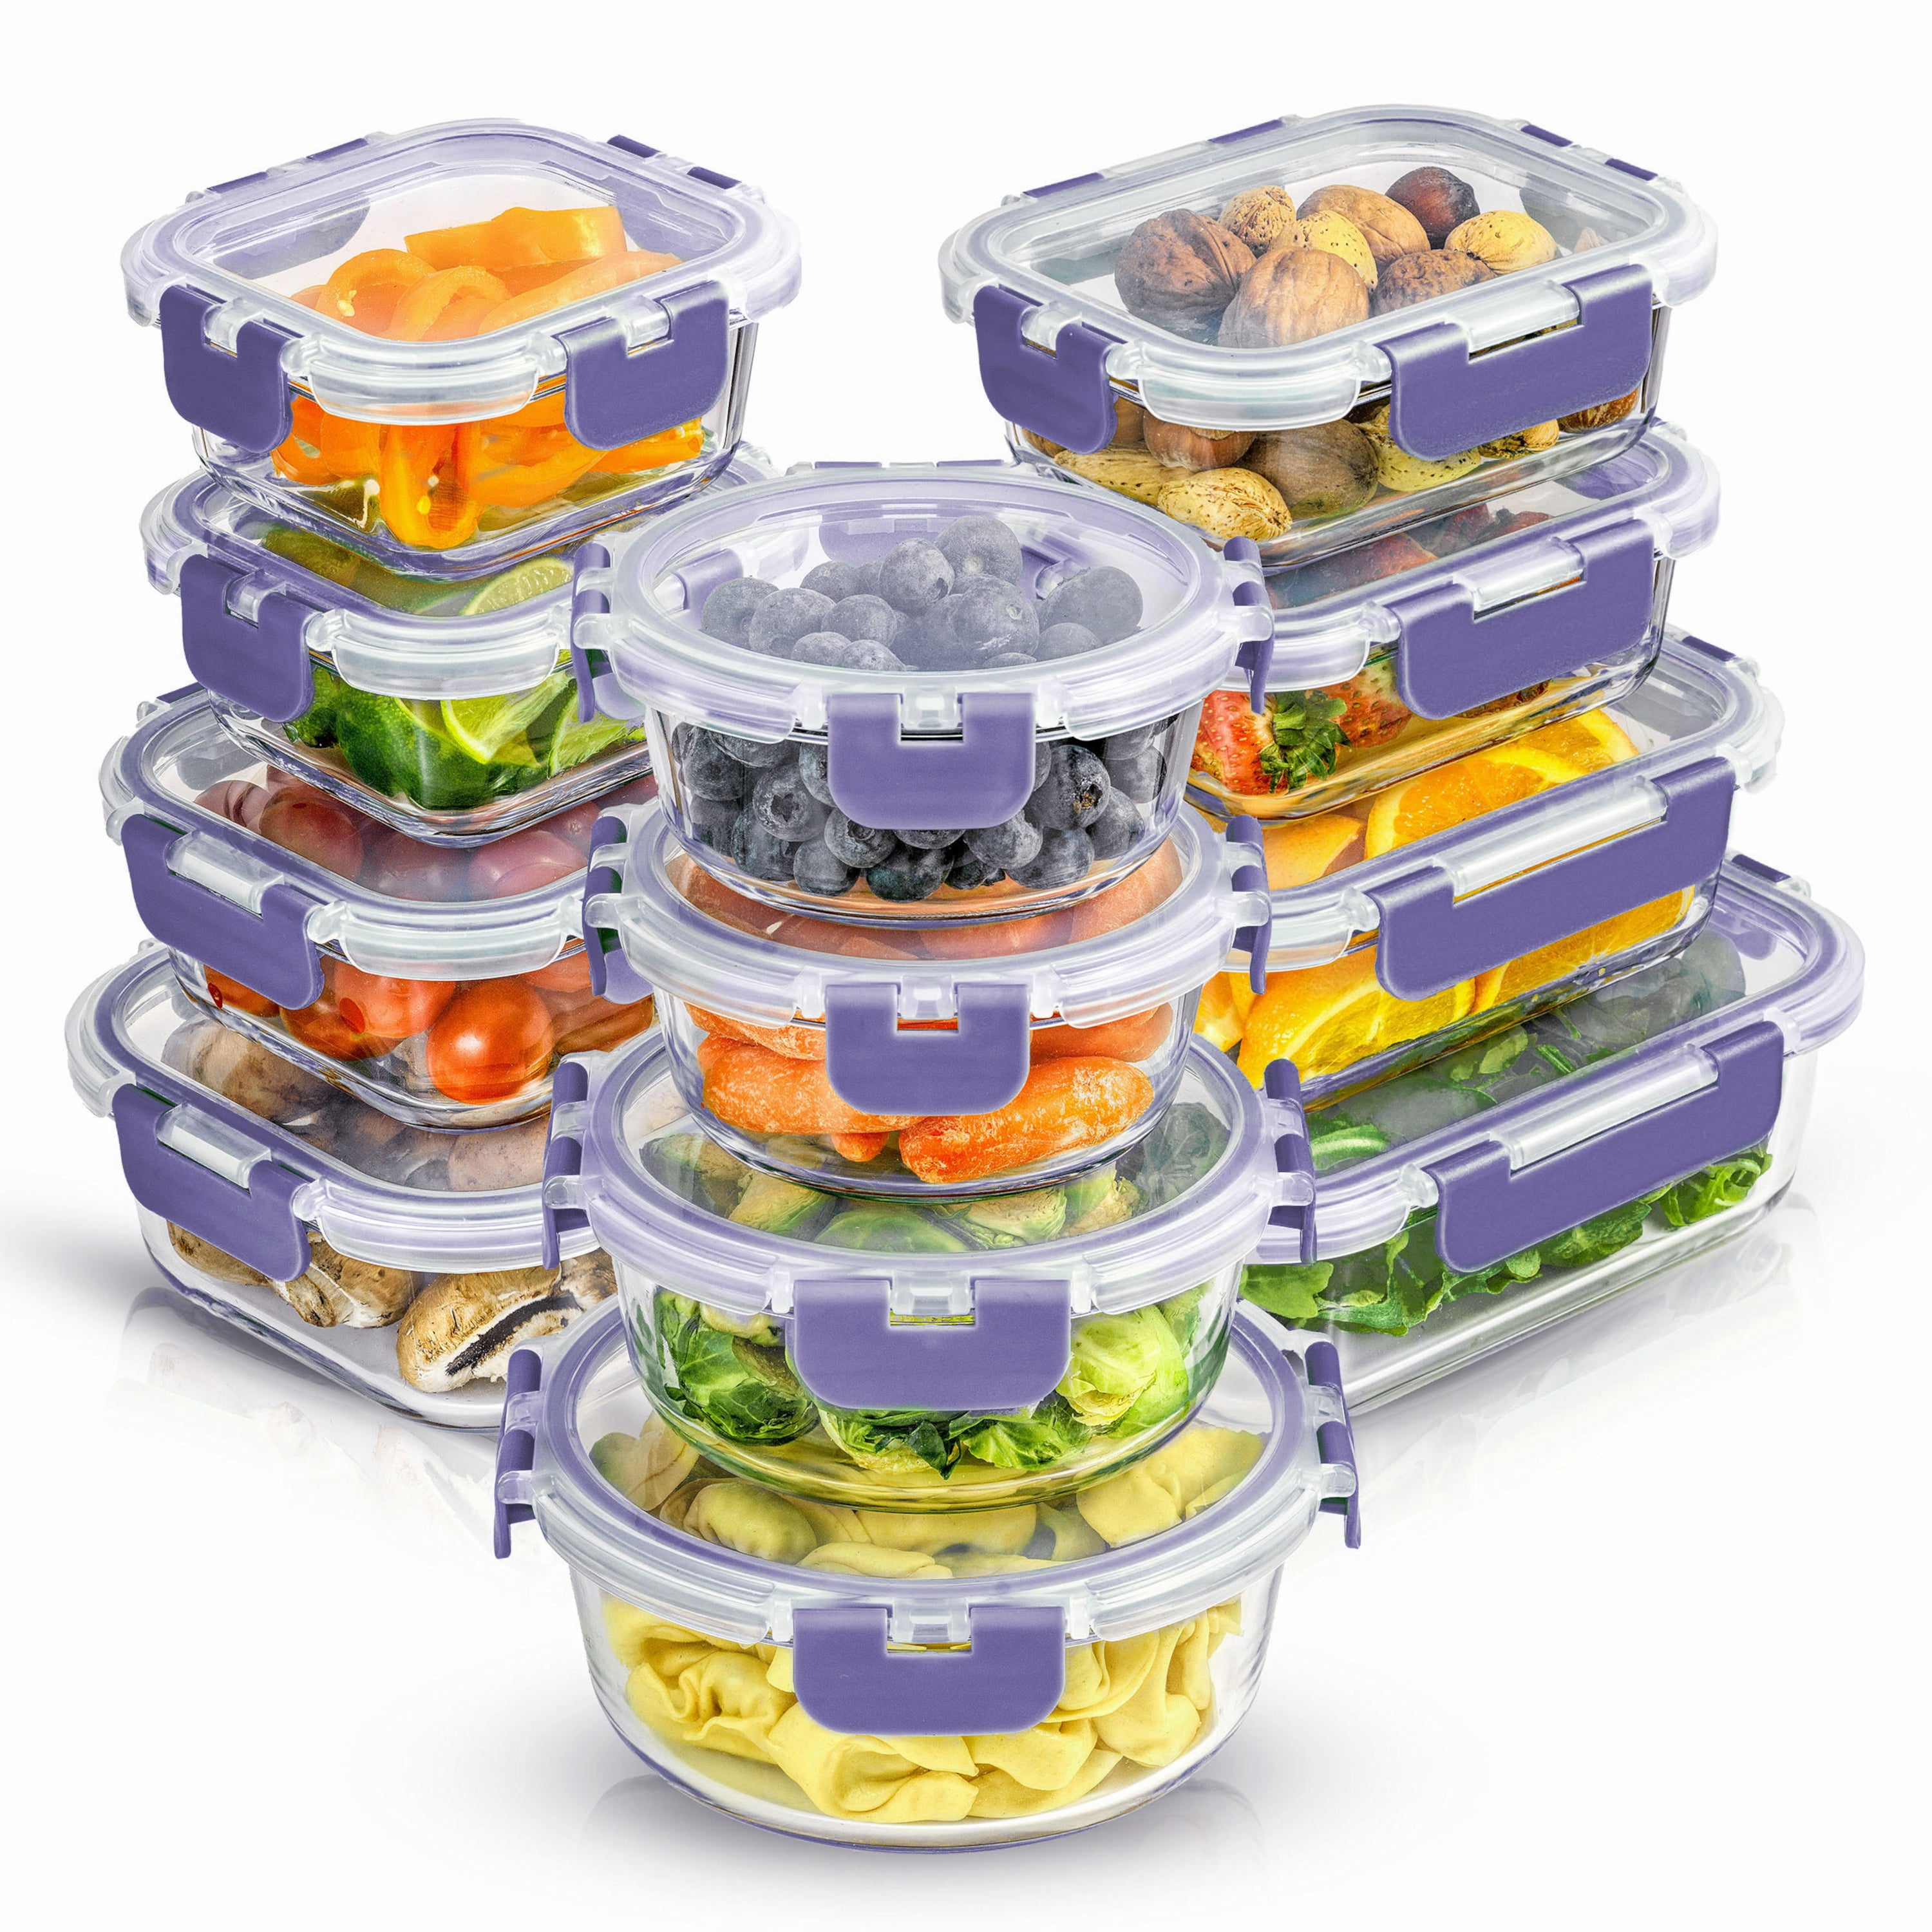 JoyJolt Divided Food Storage Containers with Lids Airtight. 5 Pack Glass  Meal Prep Containers 3 Compartment Set Glass Bento Box. Reusable Food